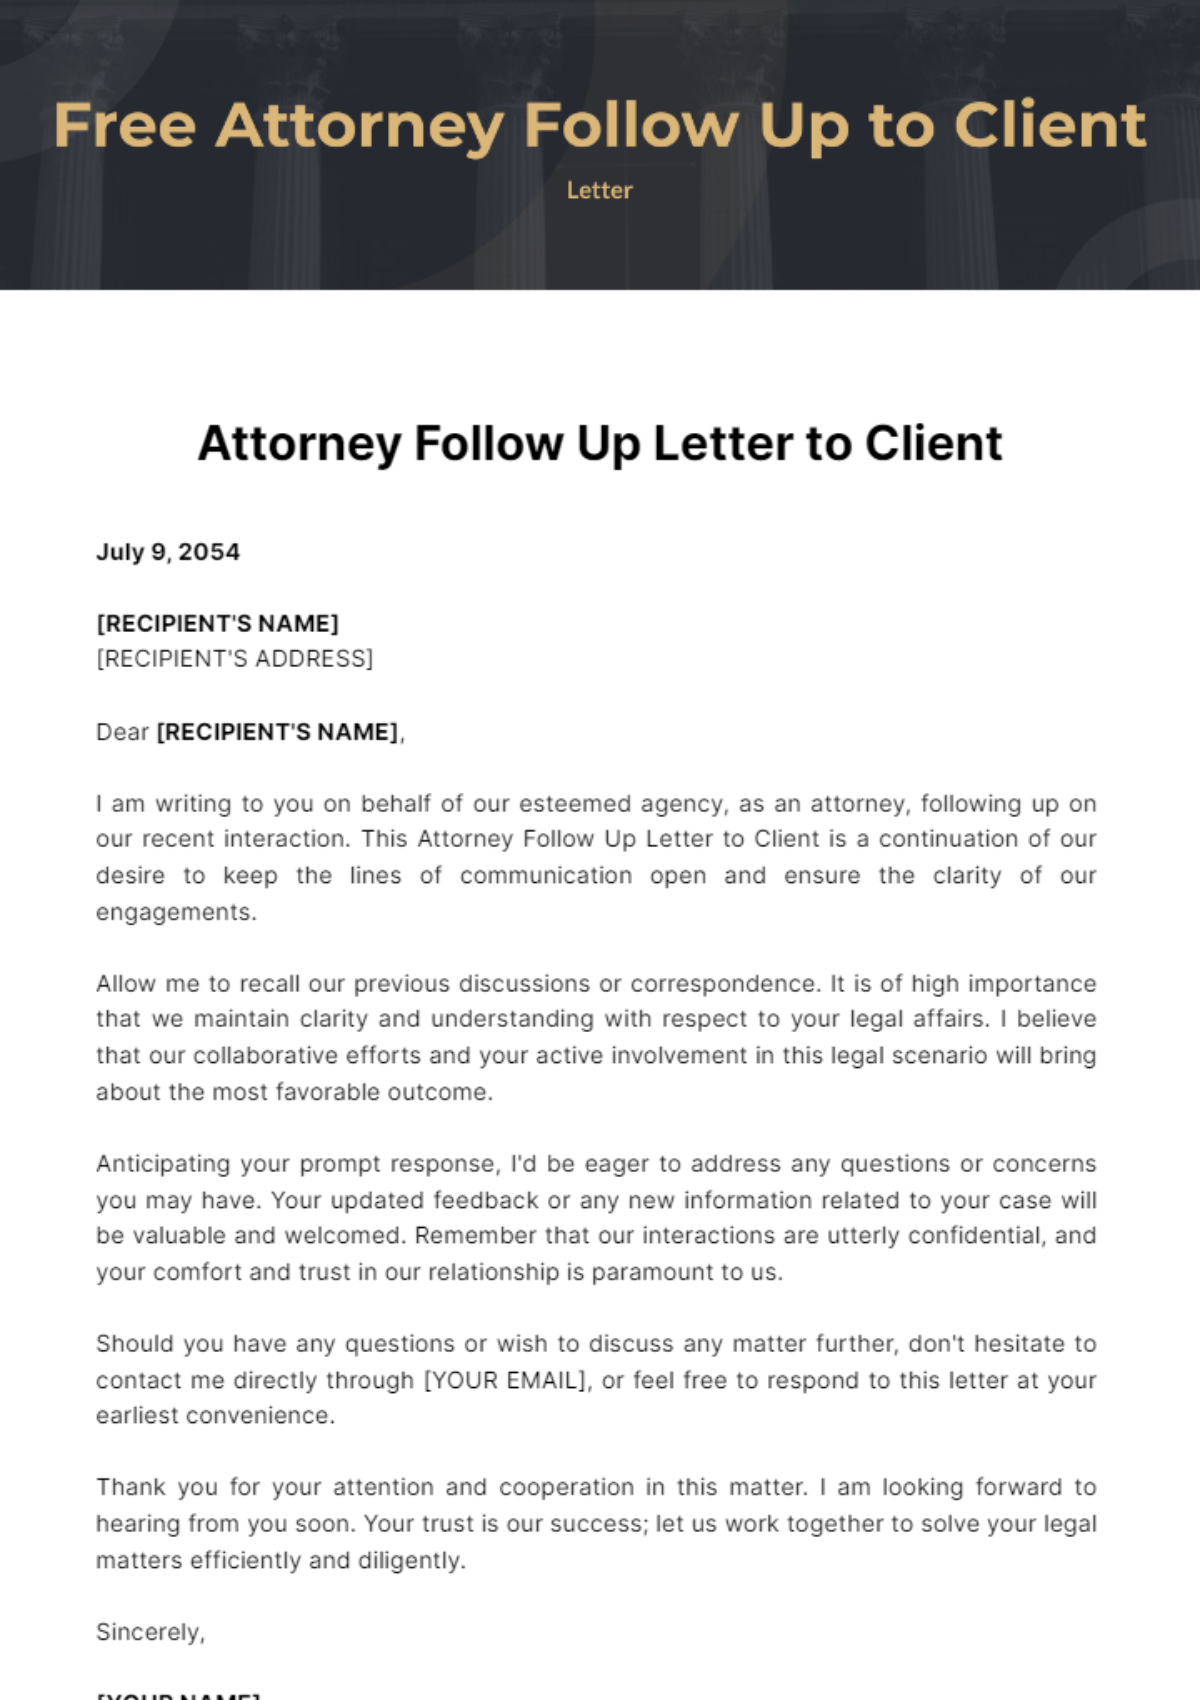 Free Attorney Follow Up Letter to Client Template